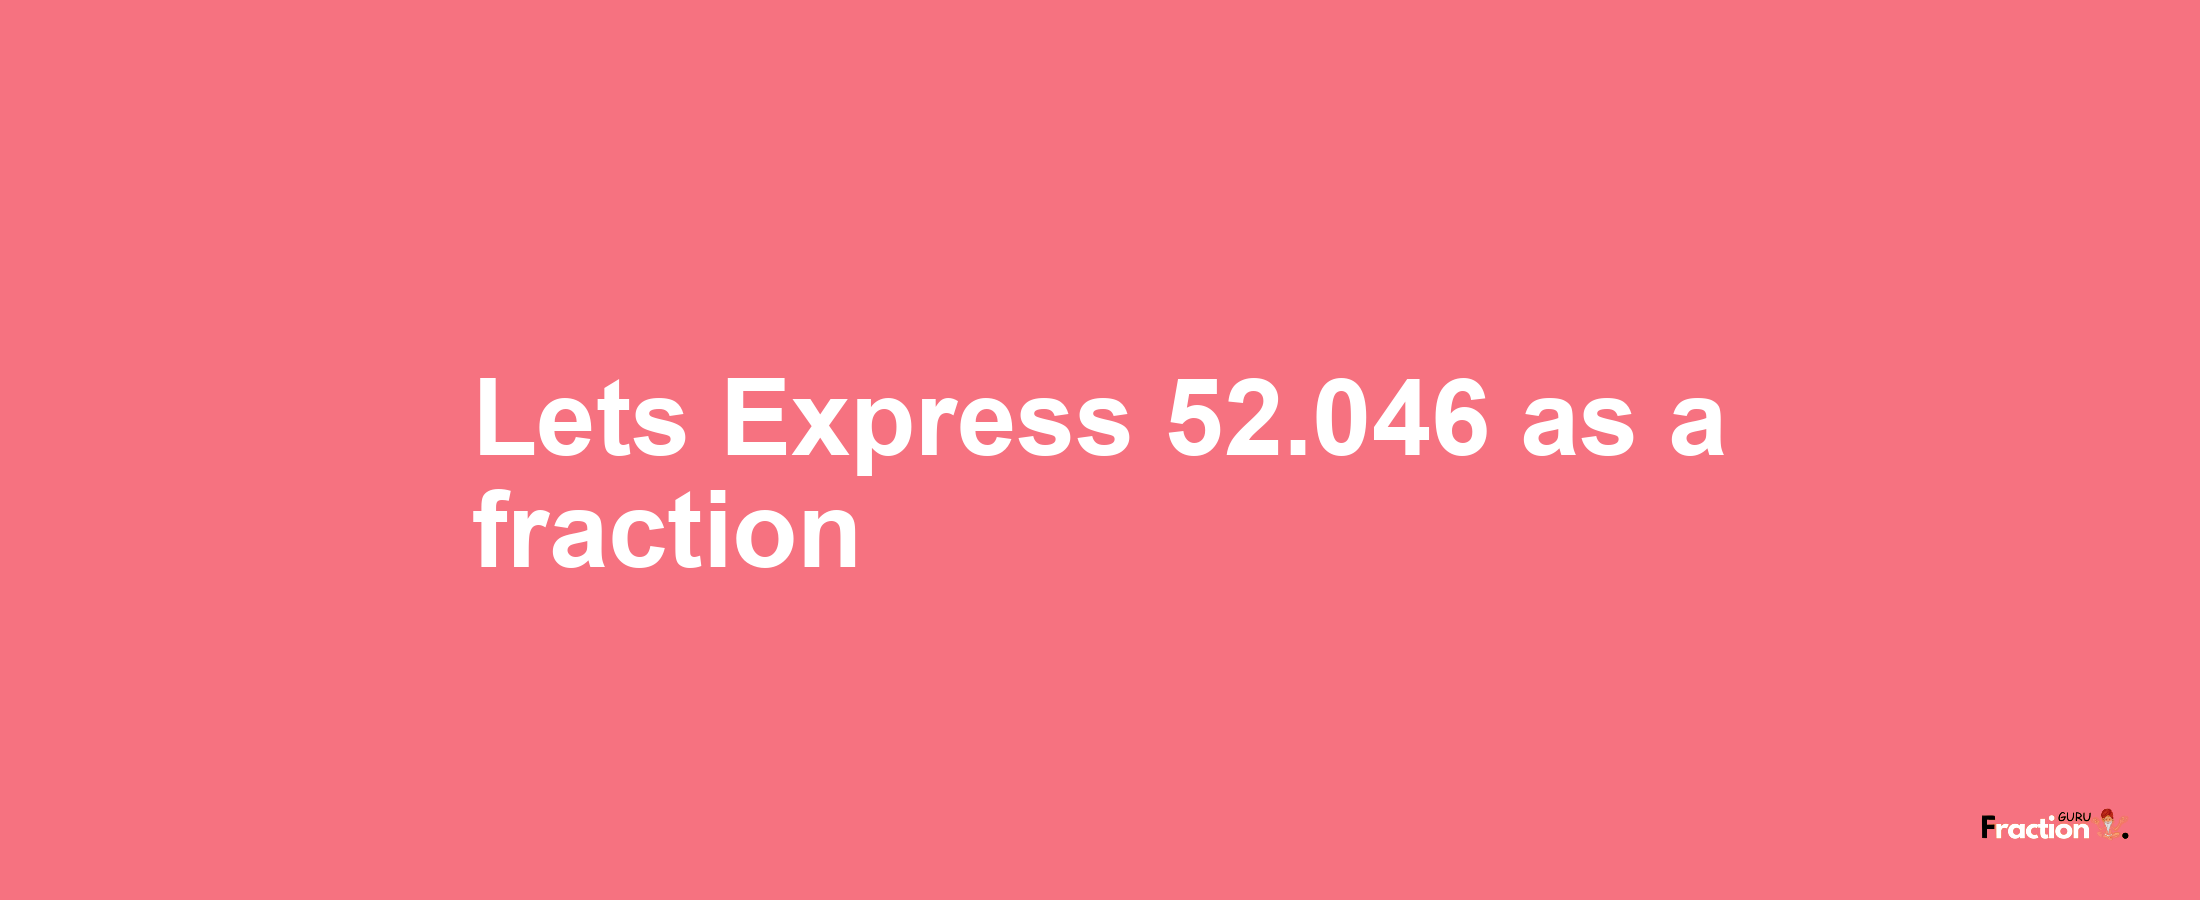 Lets Express 52.046 as afraction